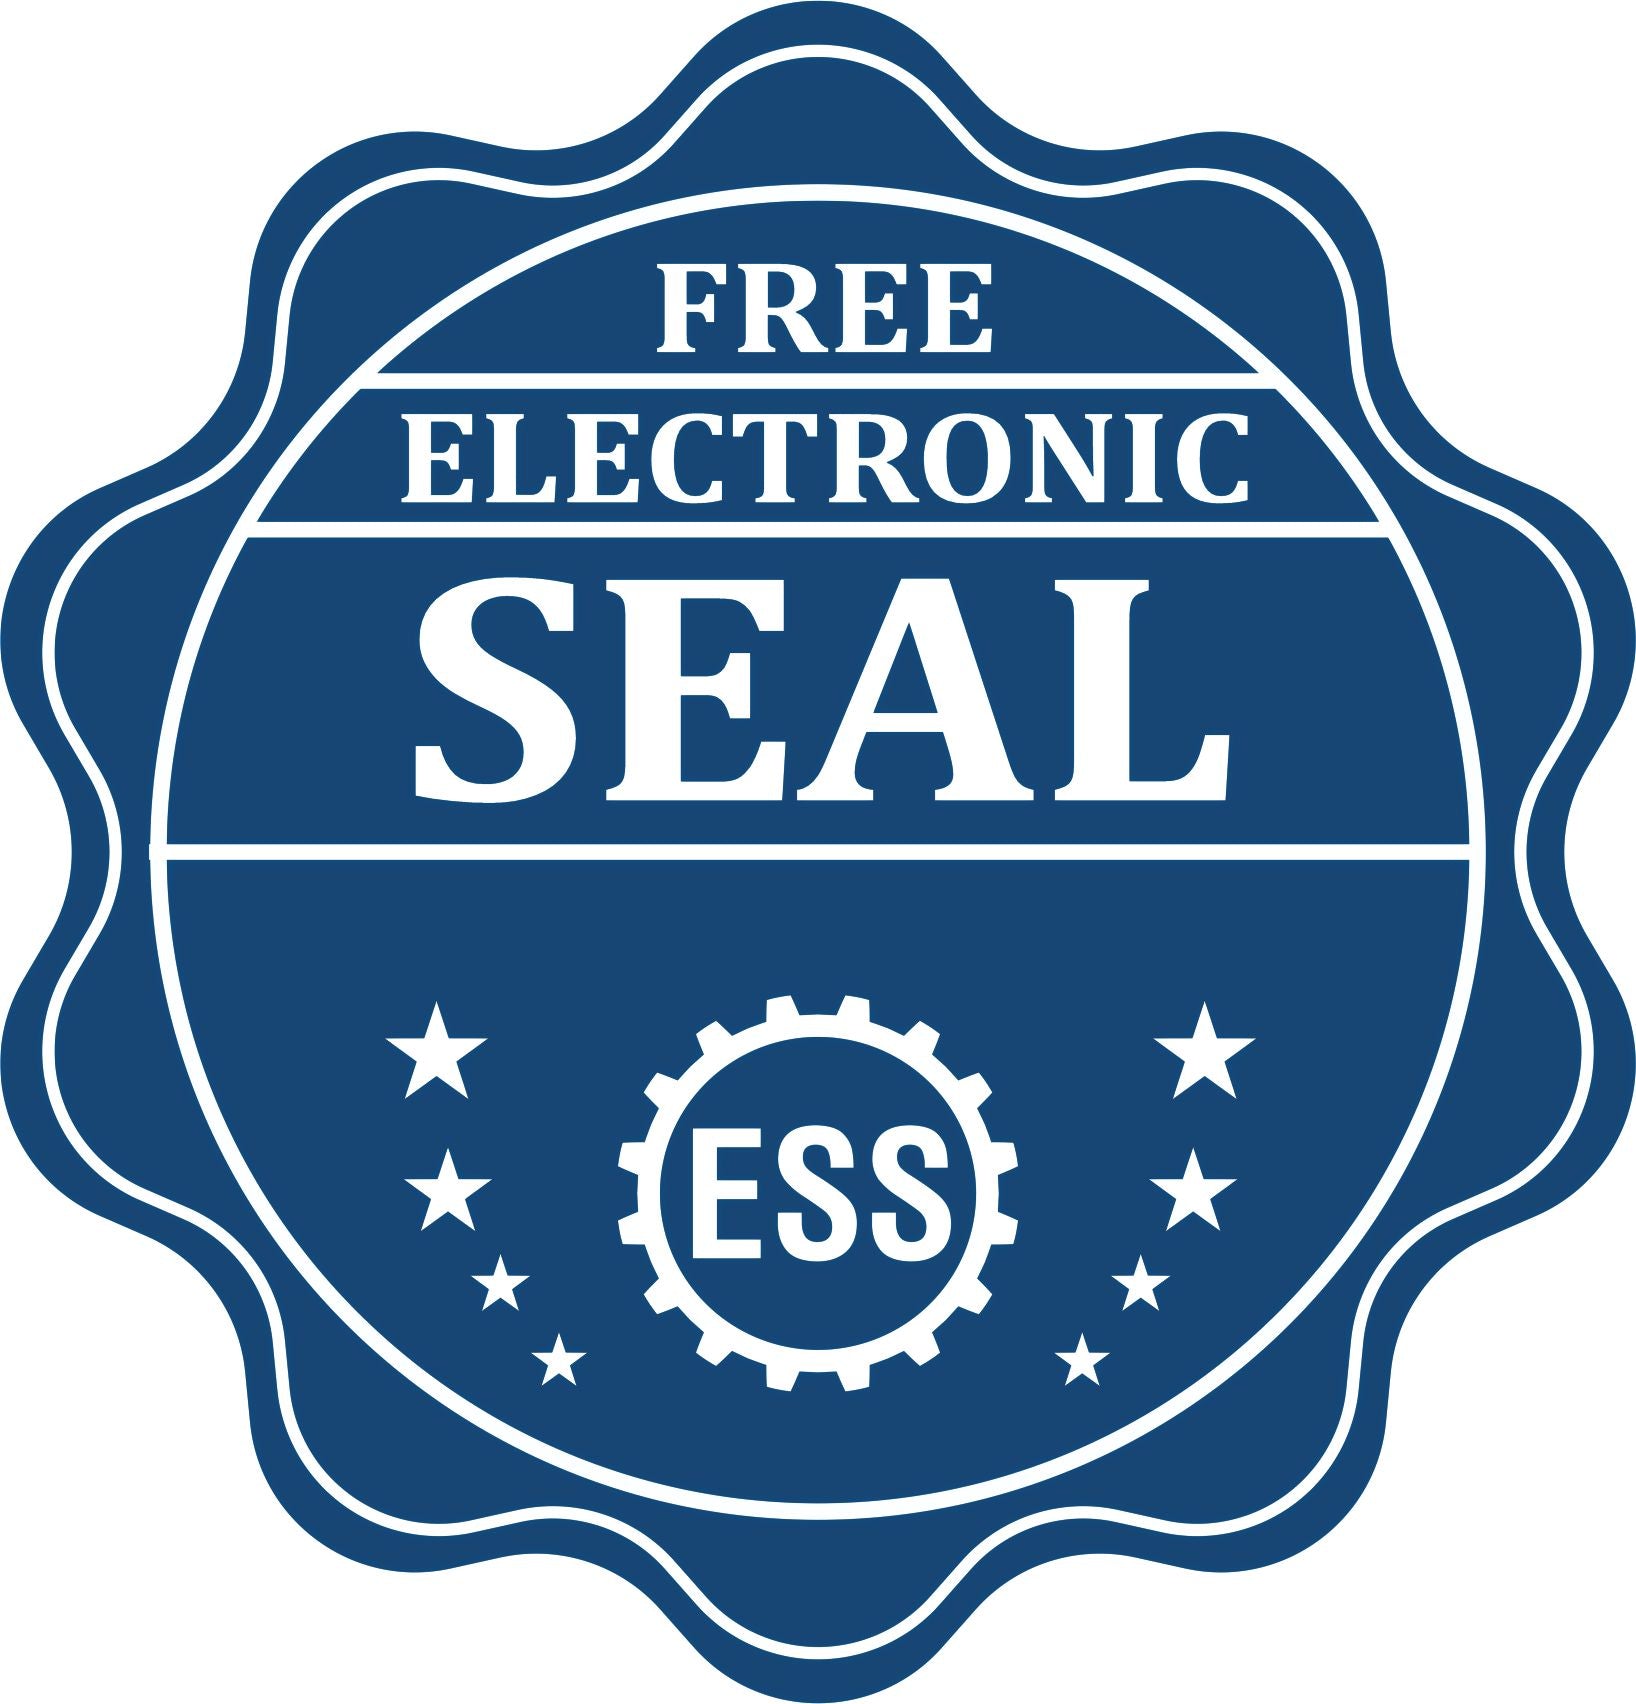 A badge showing a free electronic seal for the State of Georgia Extended Long Reach Geologist Seal with stars and the ESS gear on the emblem.